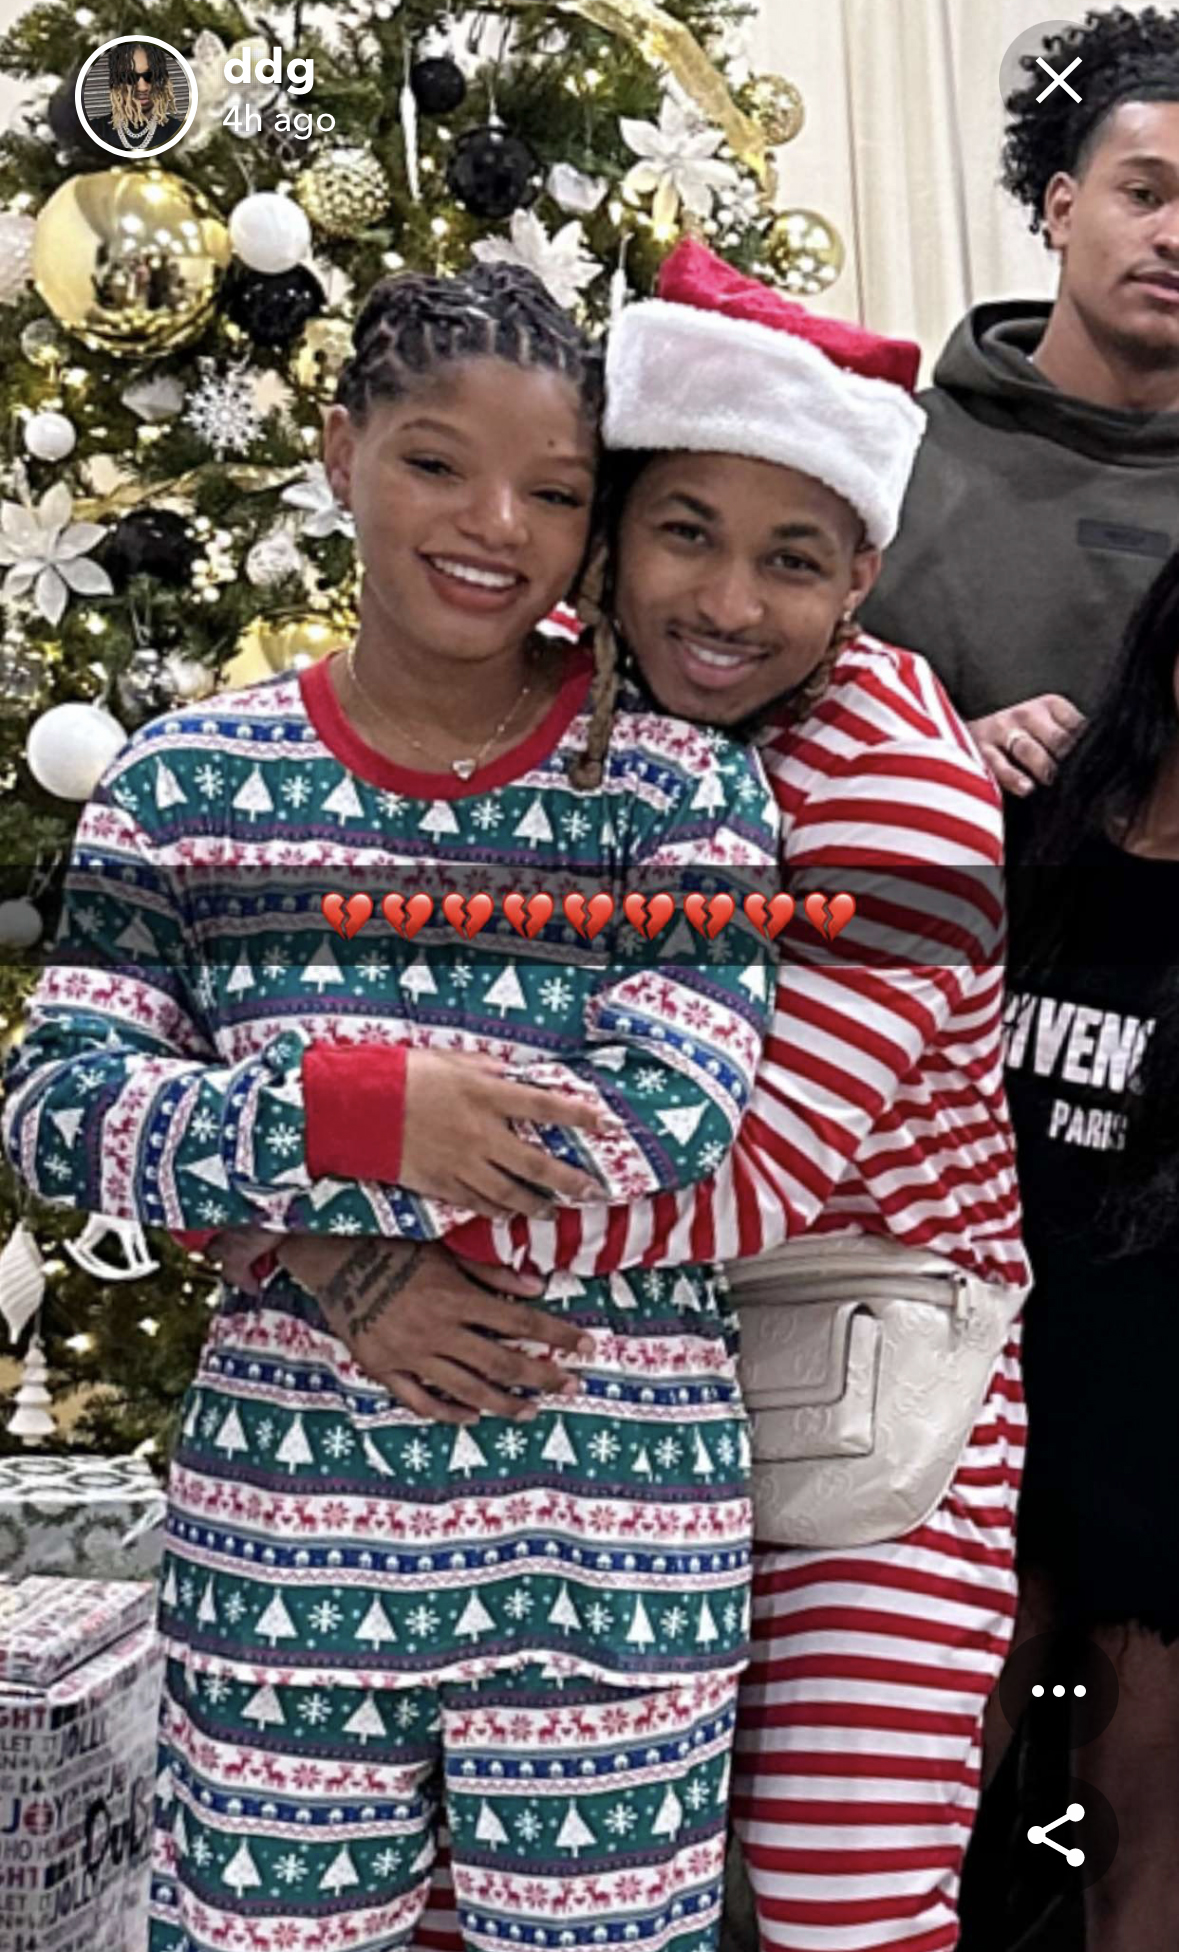 A recent clue was spotted in a YouTube video DDG posted to document his and Halle's Christmas